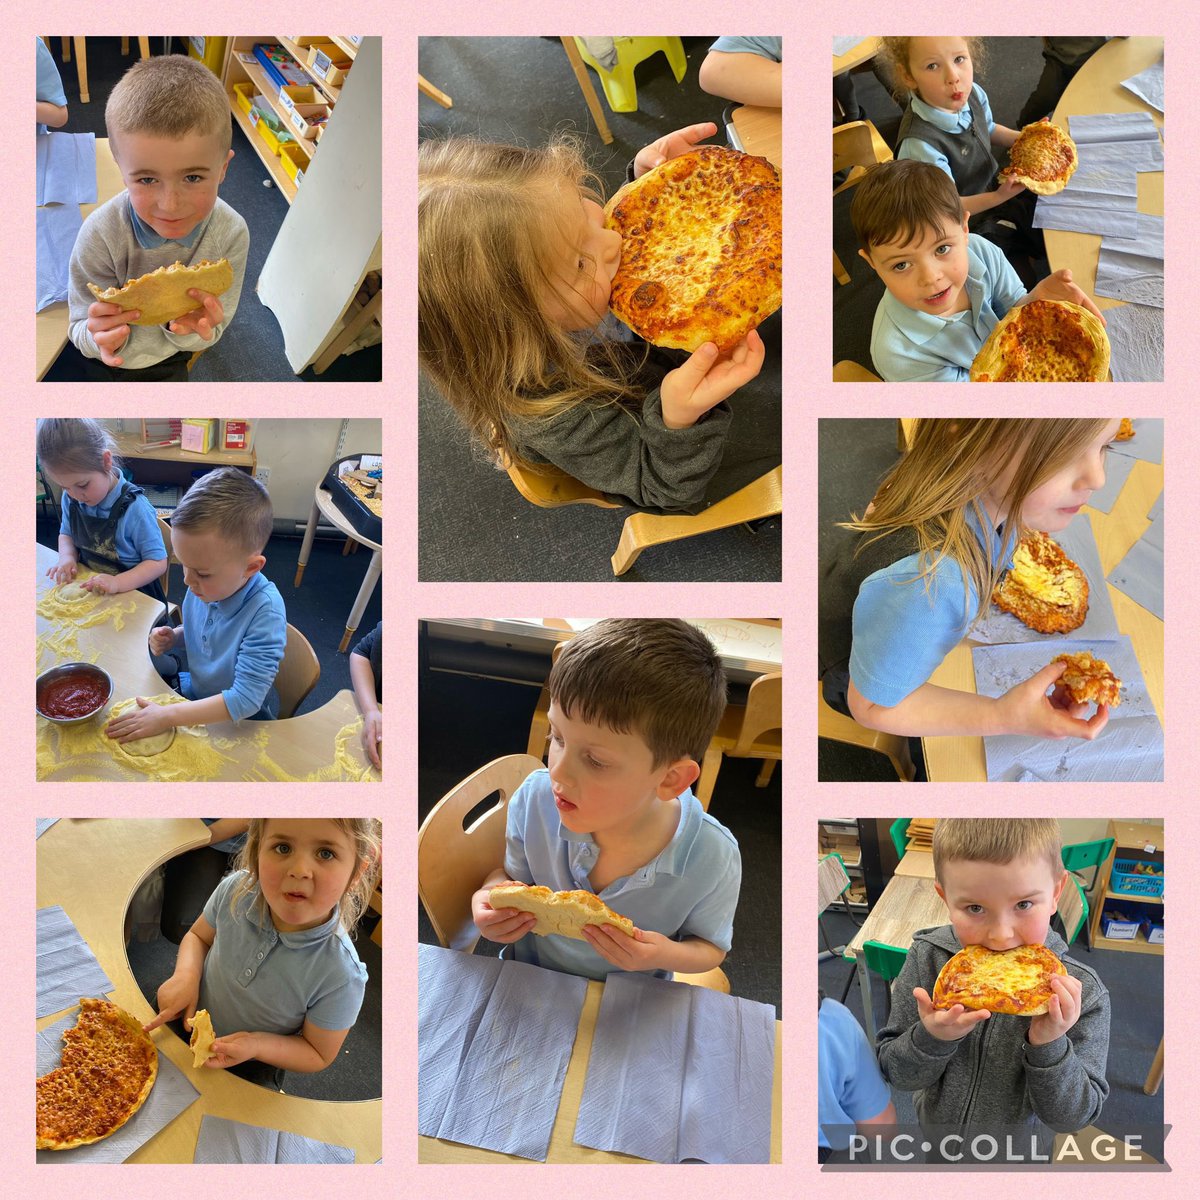 A massive thank you to @Dominos_UK for visiting our P1 class to demonstrate and make pizzas to celebrate everything they’ve learned about Italy and pizza. The school smelled amazing after your visit. Lots of happy faces in P1! #celebrate #community